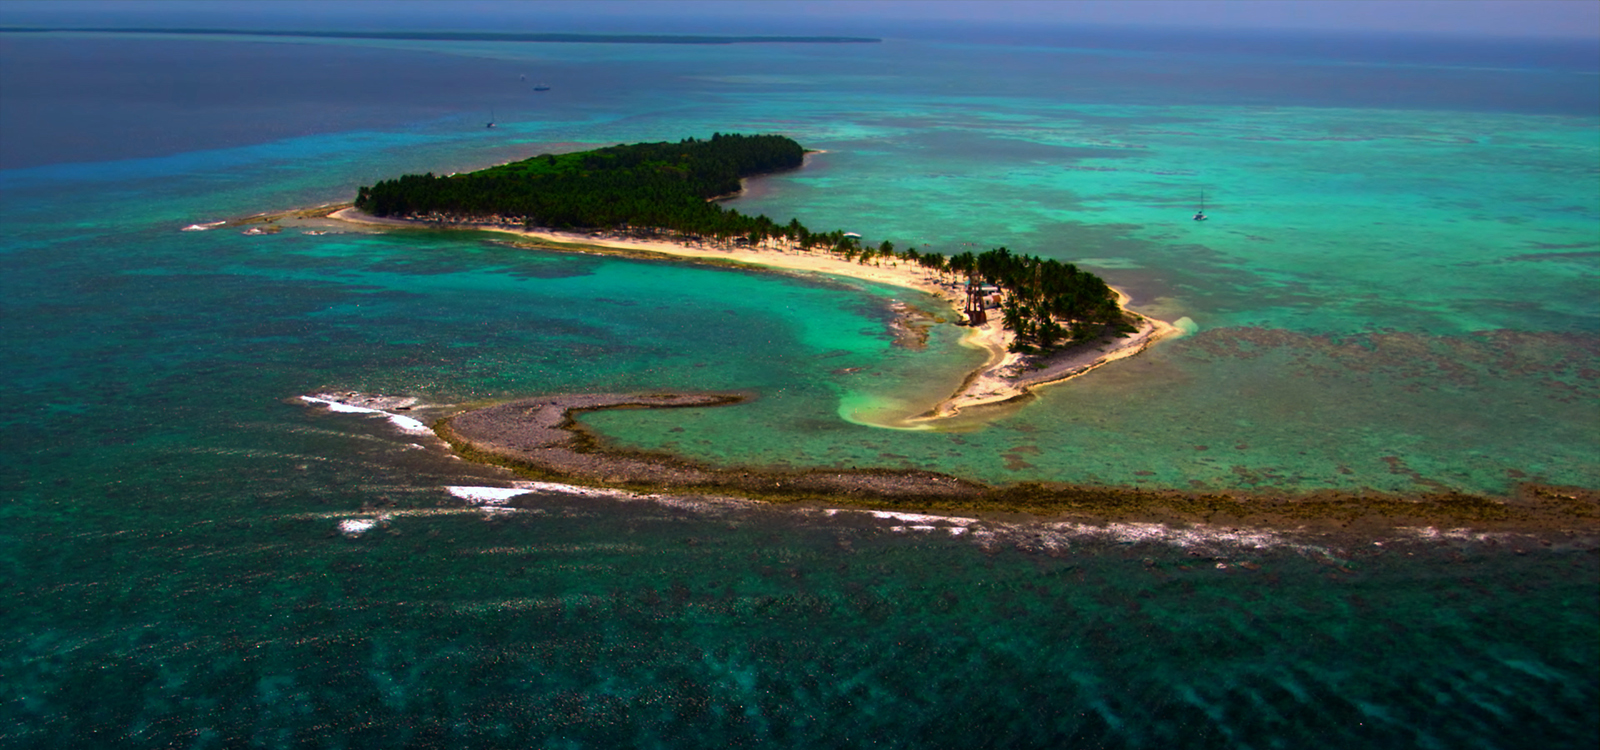 Half Moon Caye Natural Monument was the first marine protected area established in Central America and is part of the Belize Barrier Reef Reserve System World Heritage Site